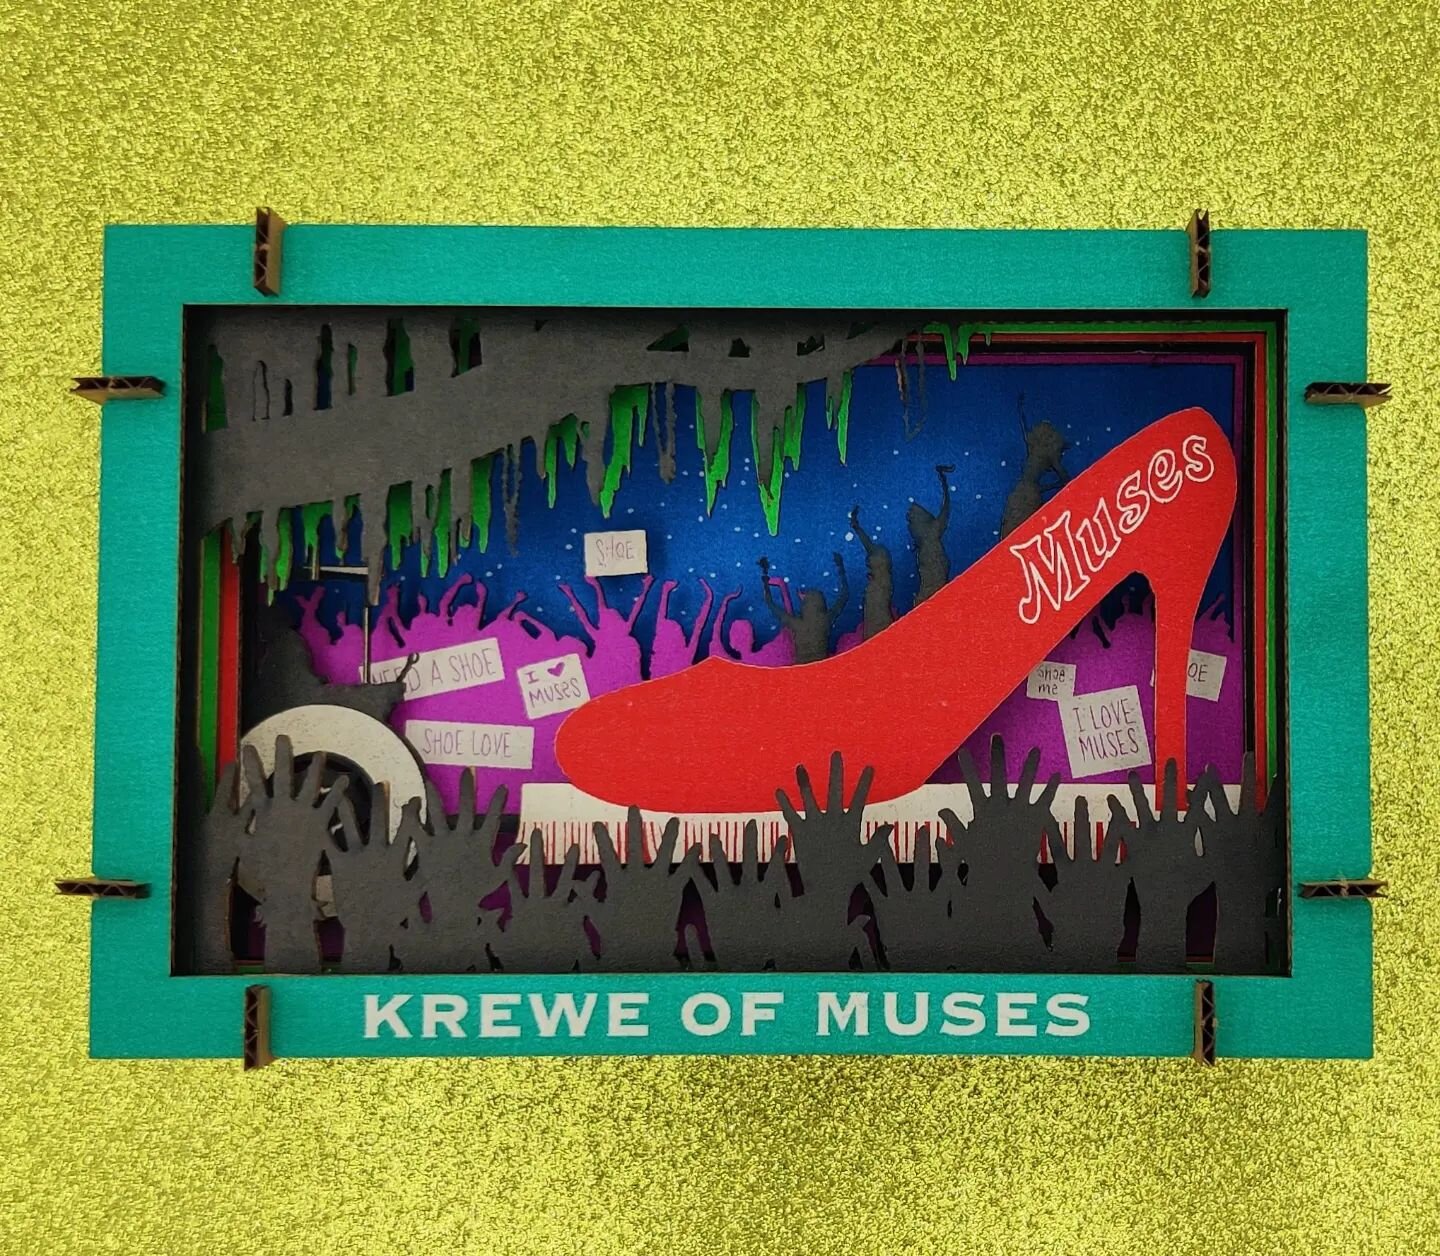 I love Muses!. Had so much fun seeing the parade and their signature floats. Of course it reminded me of this special Papercraft that we made for them this year. 

#nola #mardigras #musesshoes